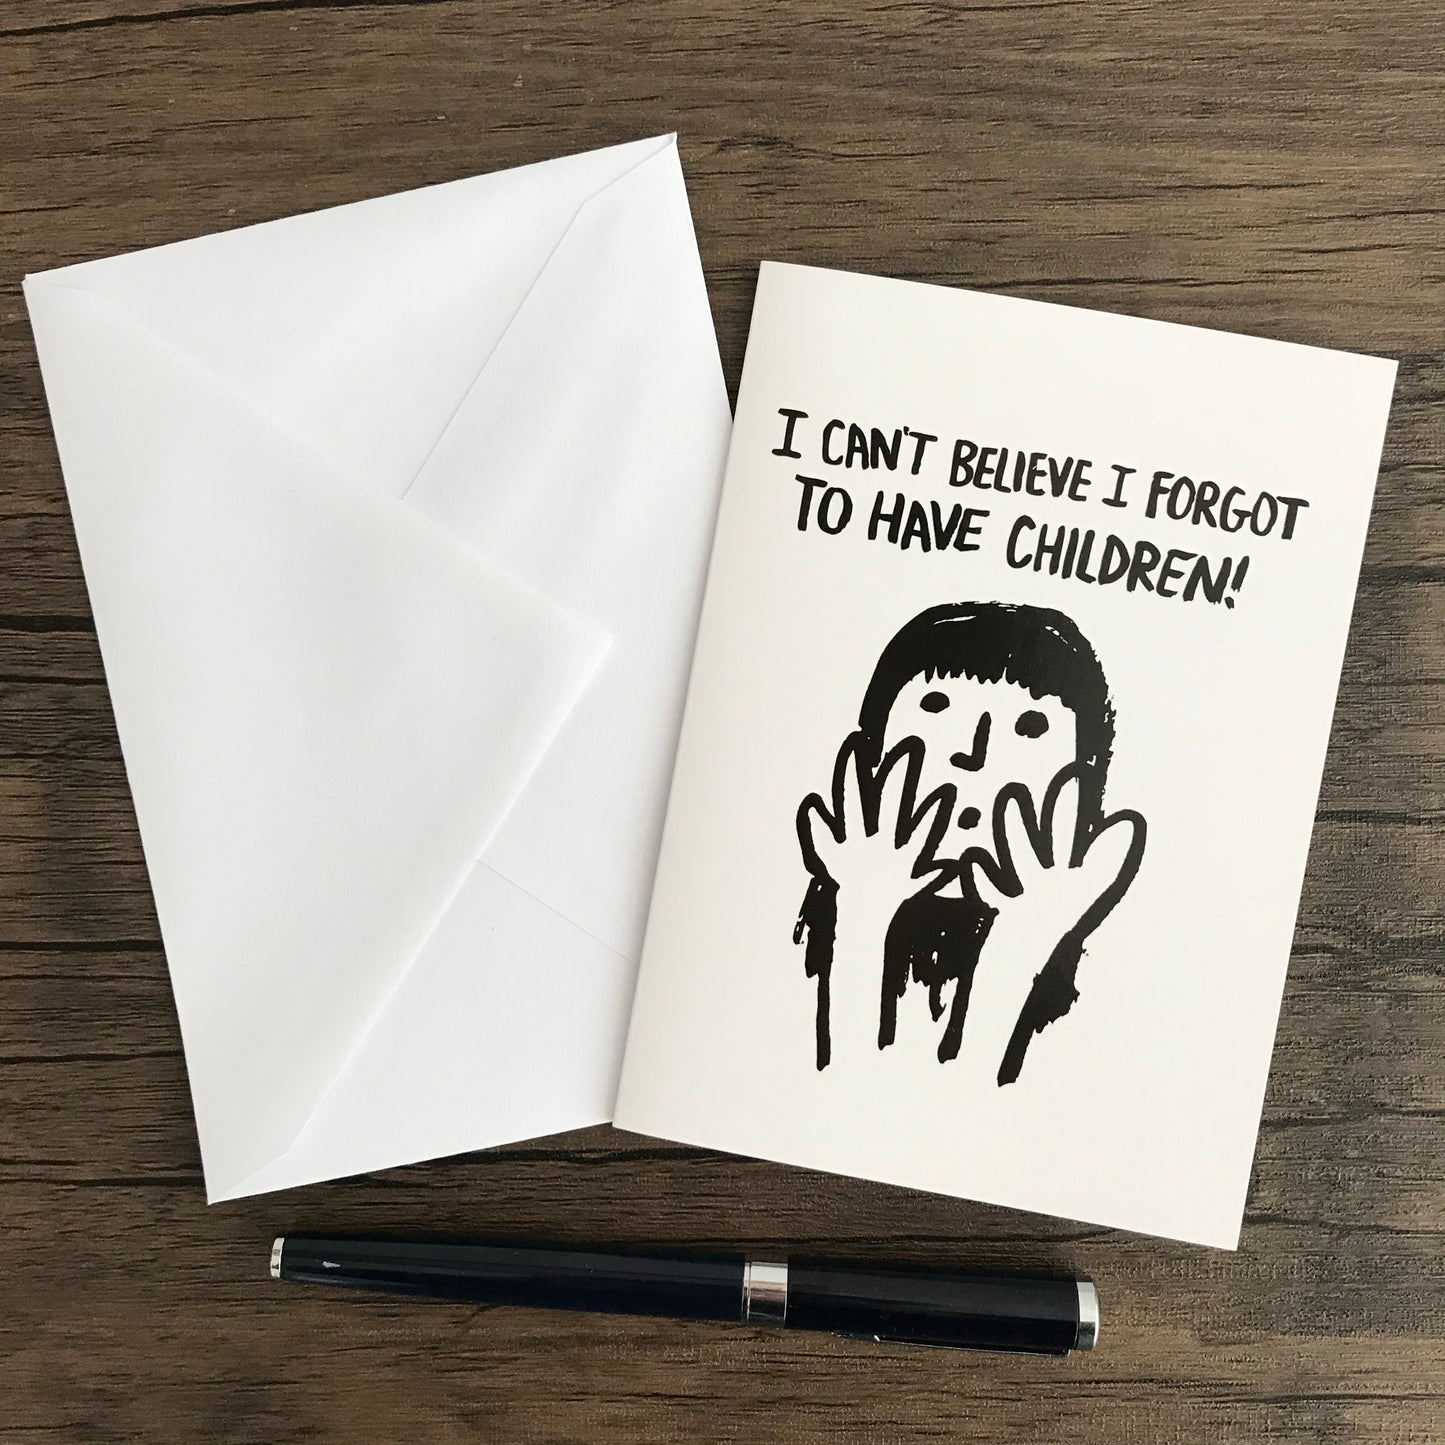 I CAN'T BELIEVE I FORGOT TO HAVE CHILDREN! - GREETING CARD